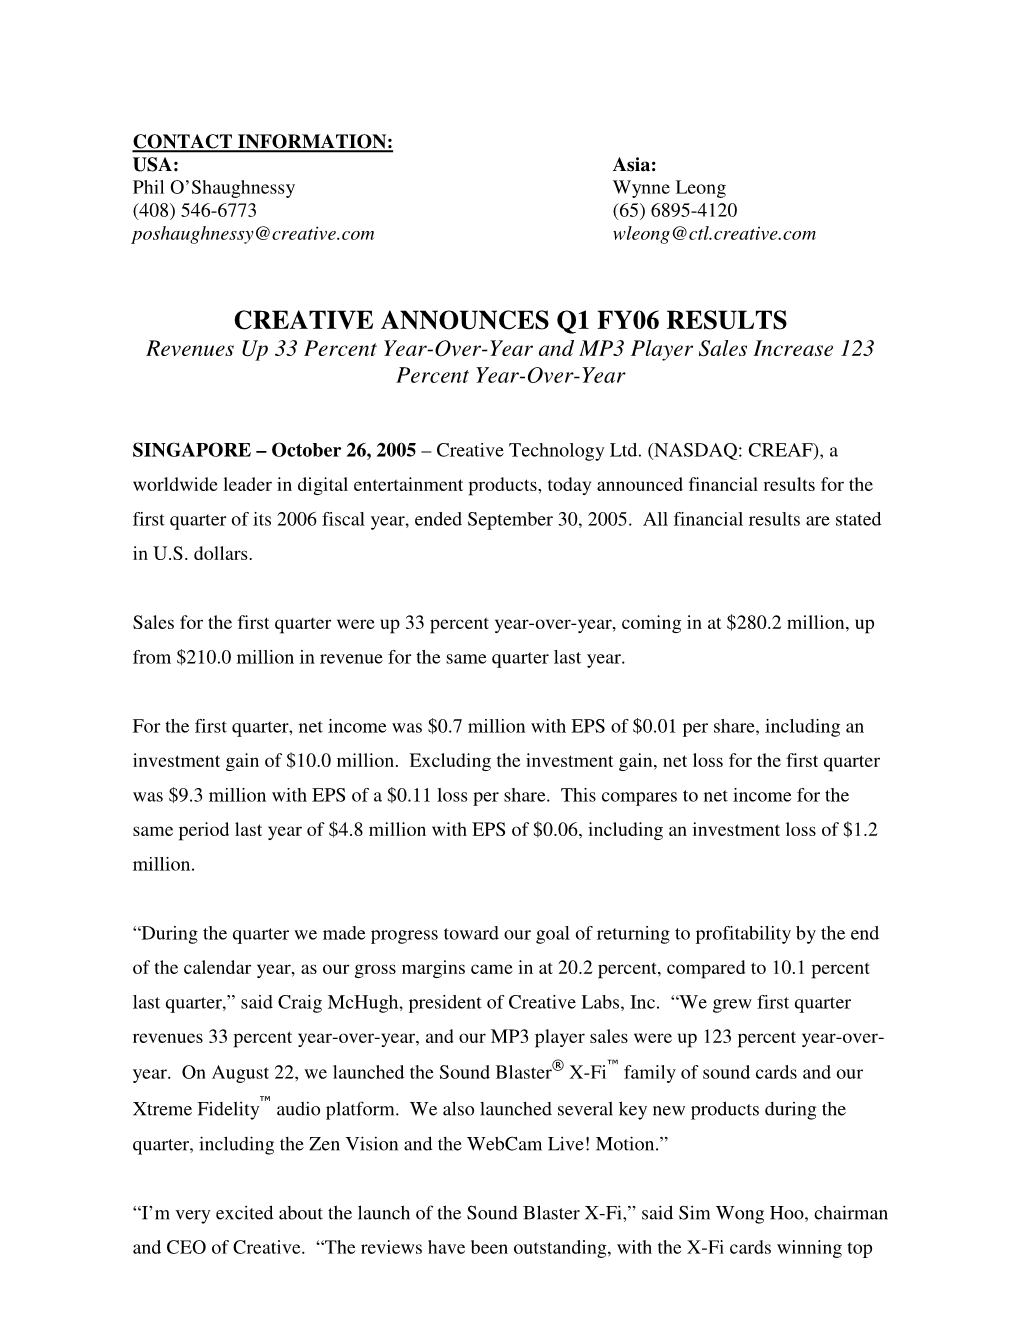 CREATIVE ANNOUNCES Q1 FY06 RESULTS Revenues up 33 Percent Year-Over-Year and MP3 Player Sales Increase 123 Percent Year-Over-Year